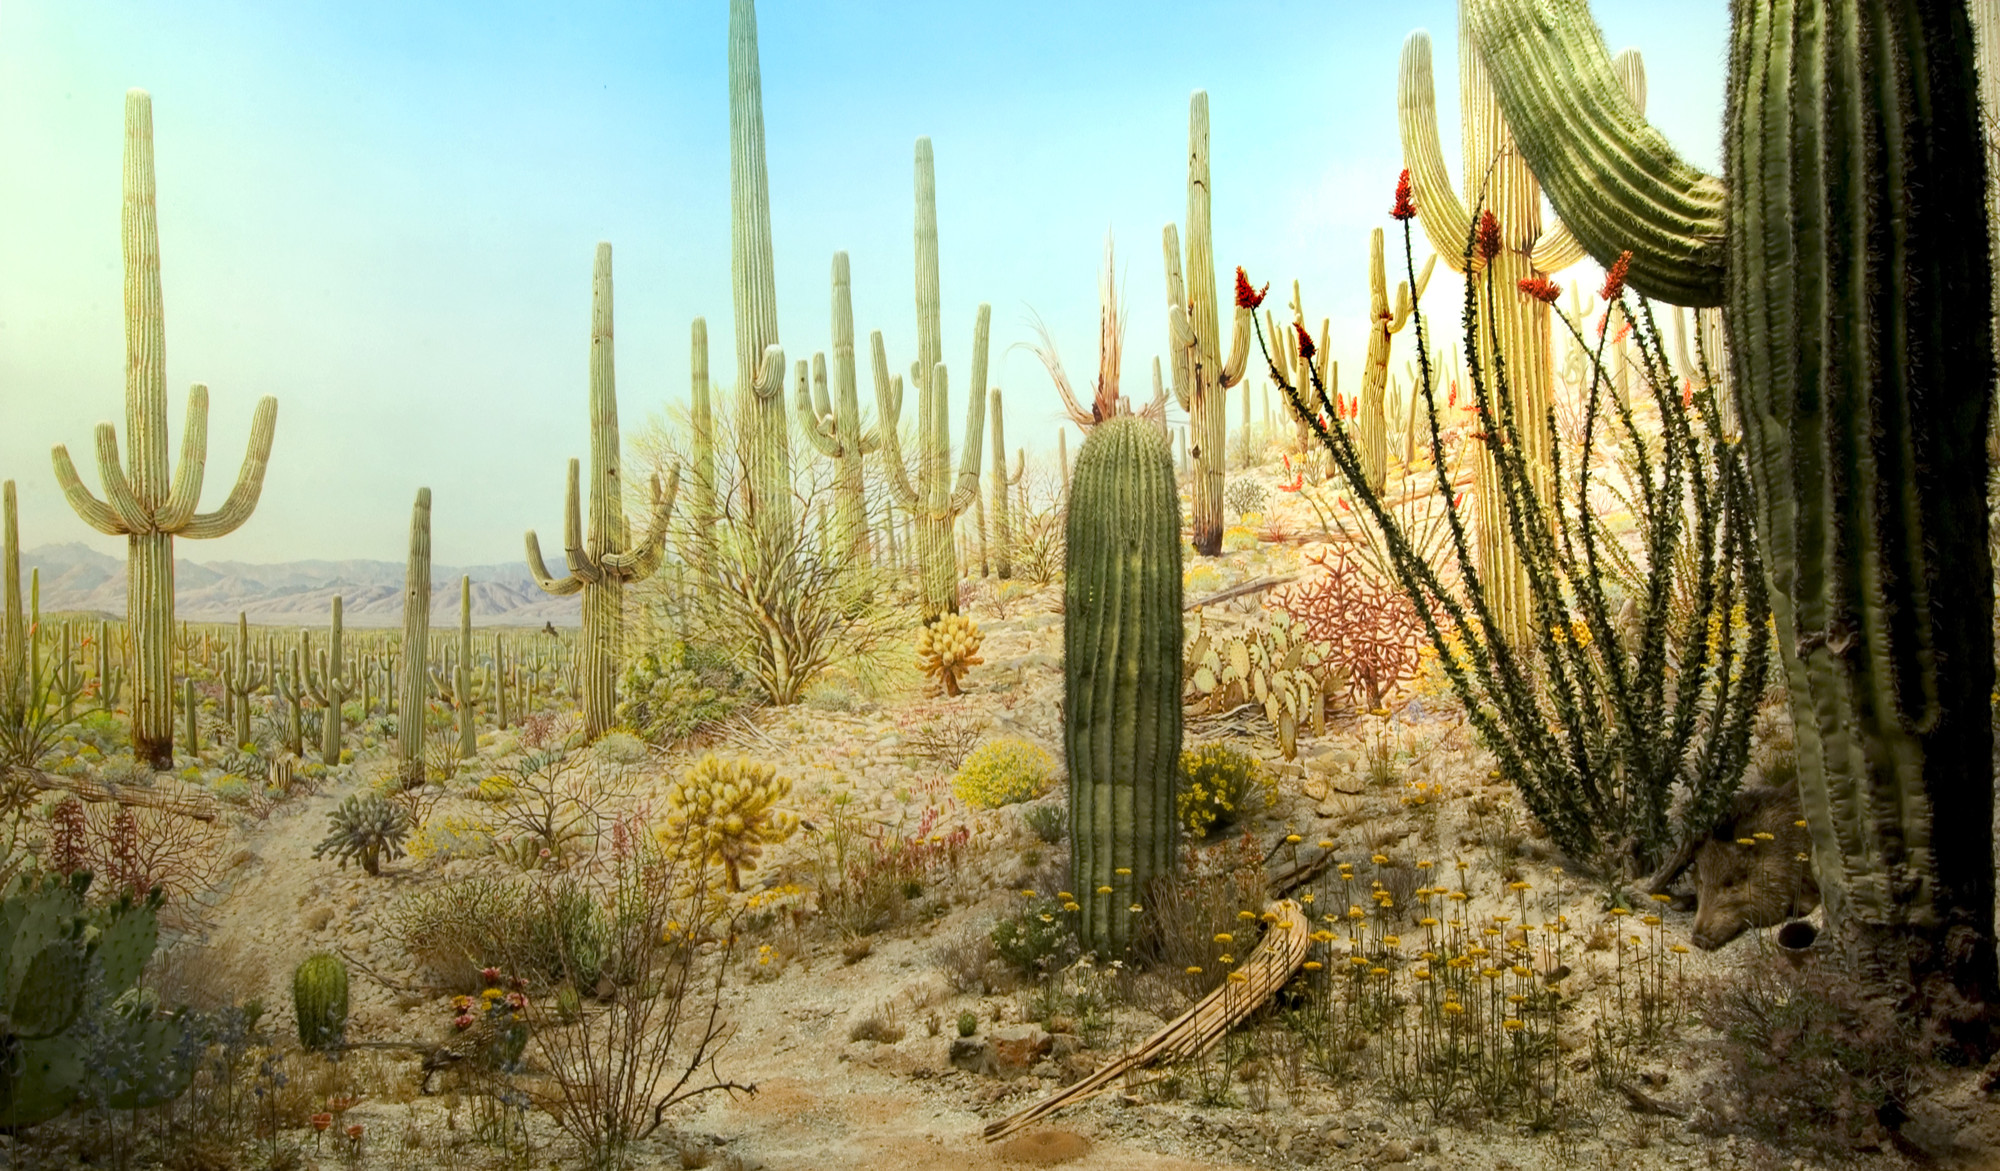 Saguaro cactus diorama in the Hall of North American Forests ...